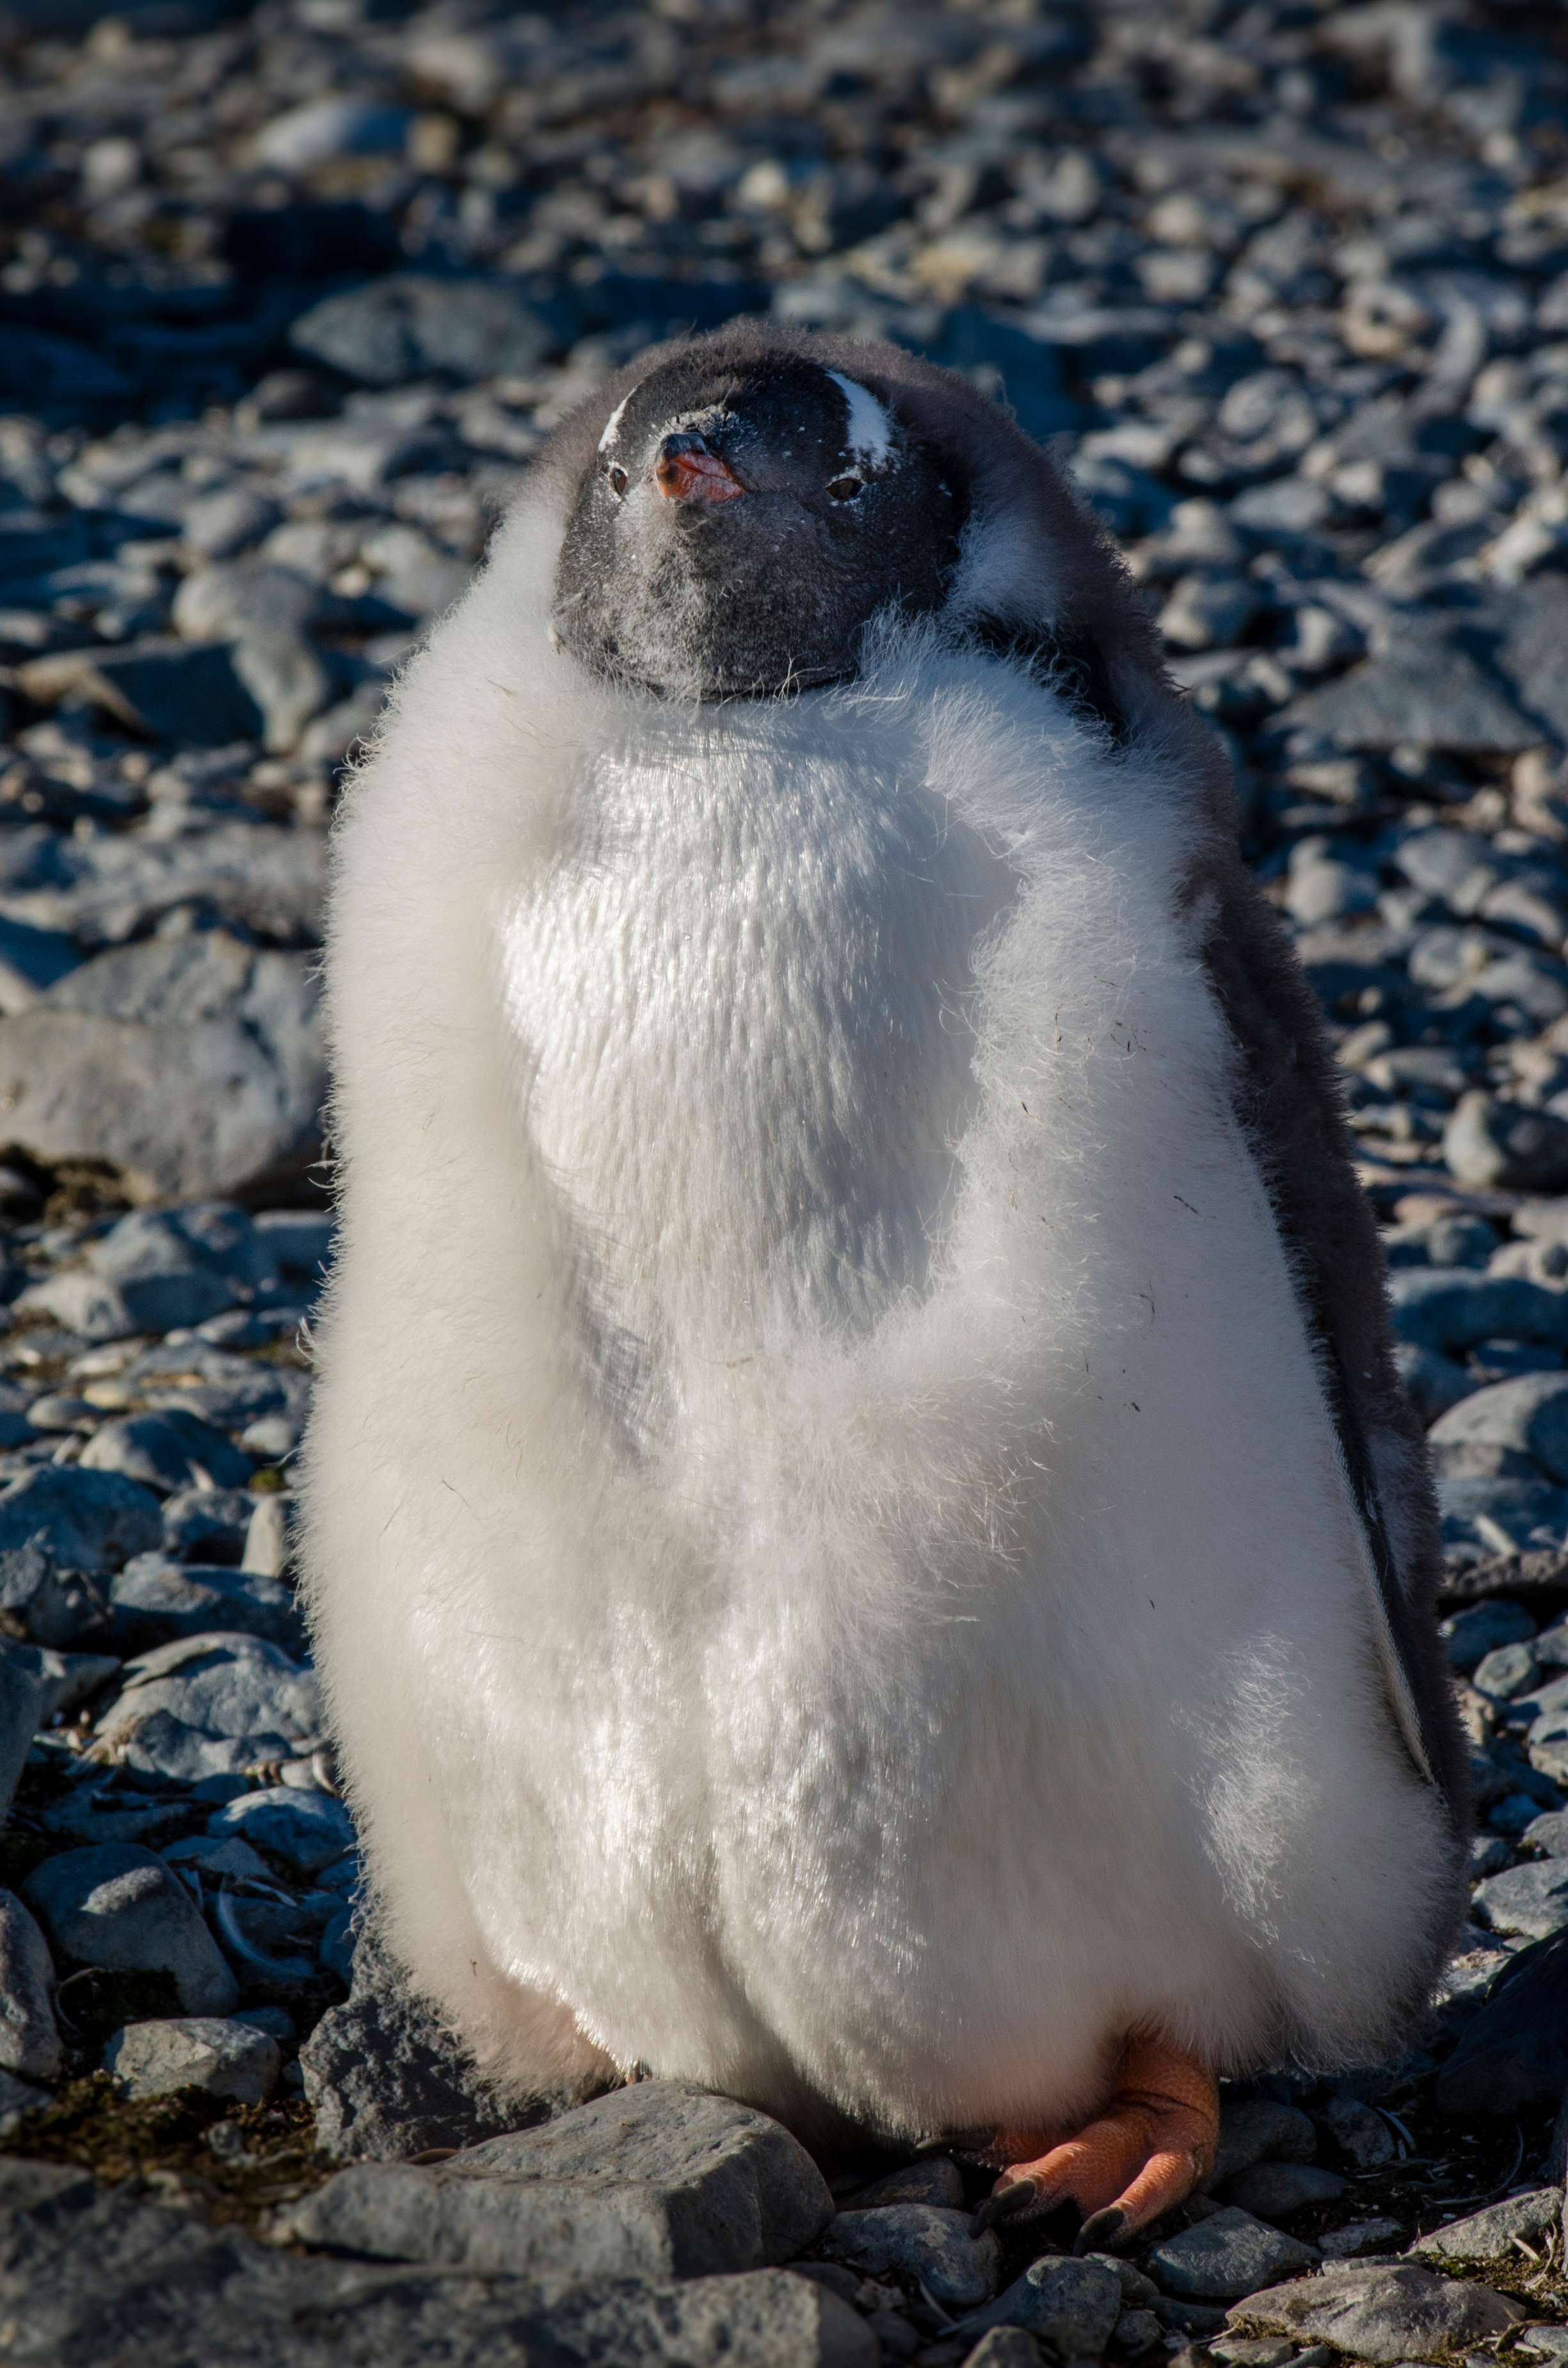 Molting baby penguin chick, Antarctica